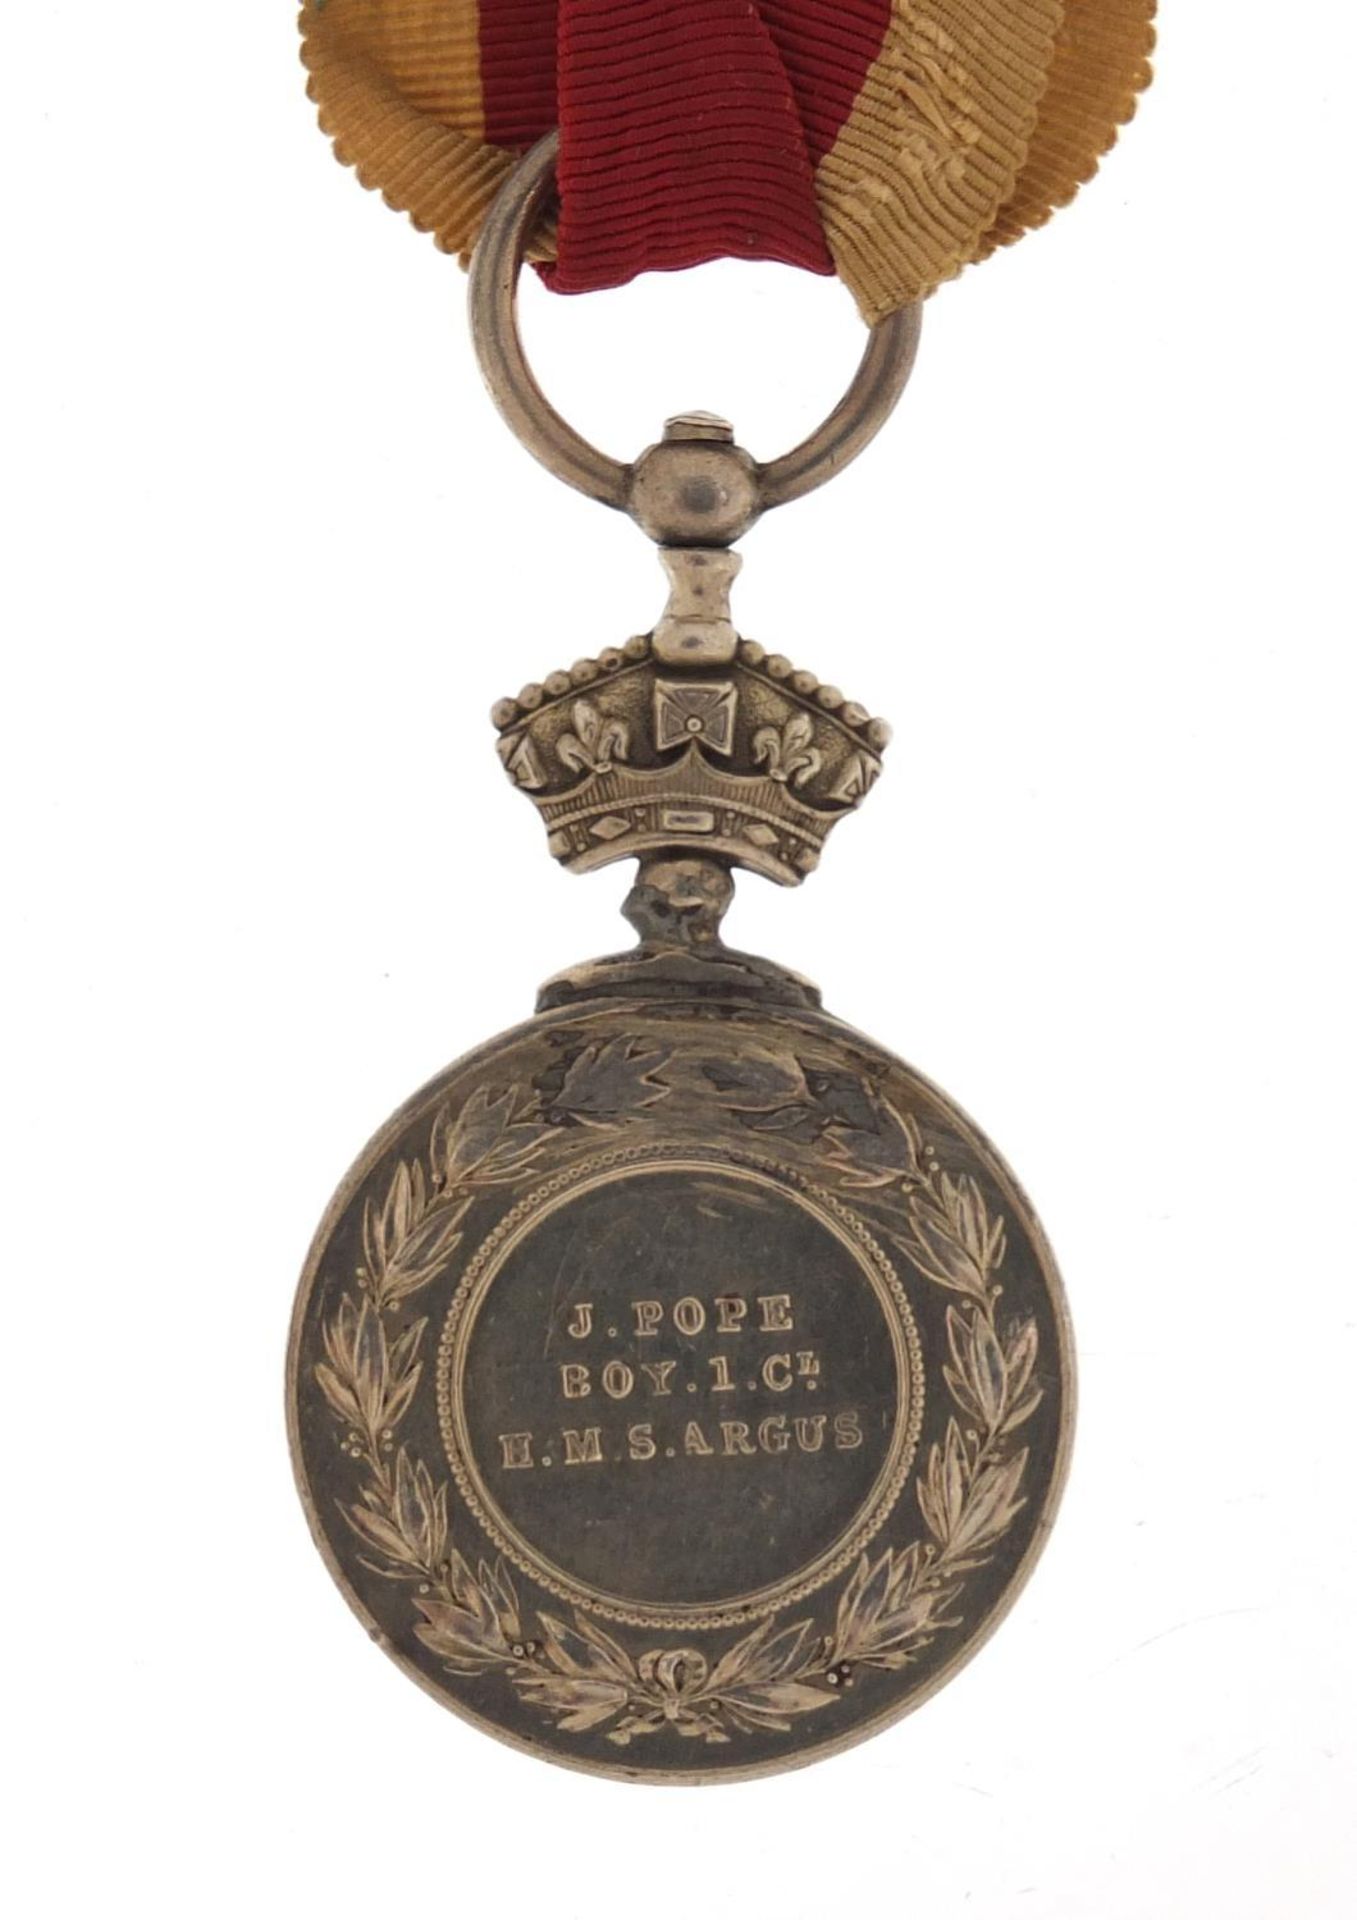 Victorian British military Abyssinian War medal awarded to J.POPE.BOY.1.CL.H.M.S.ARGUS - Image 2 of 2